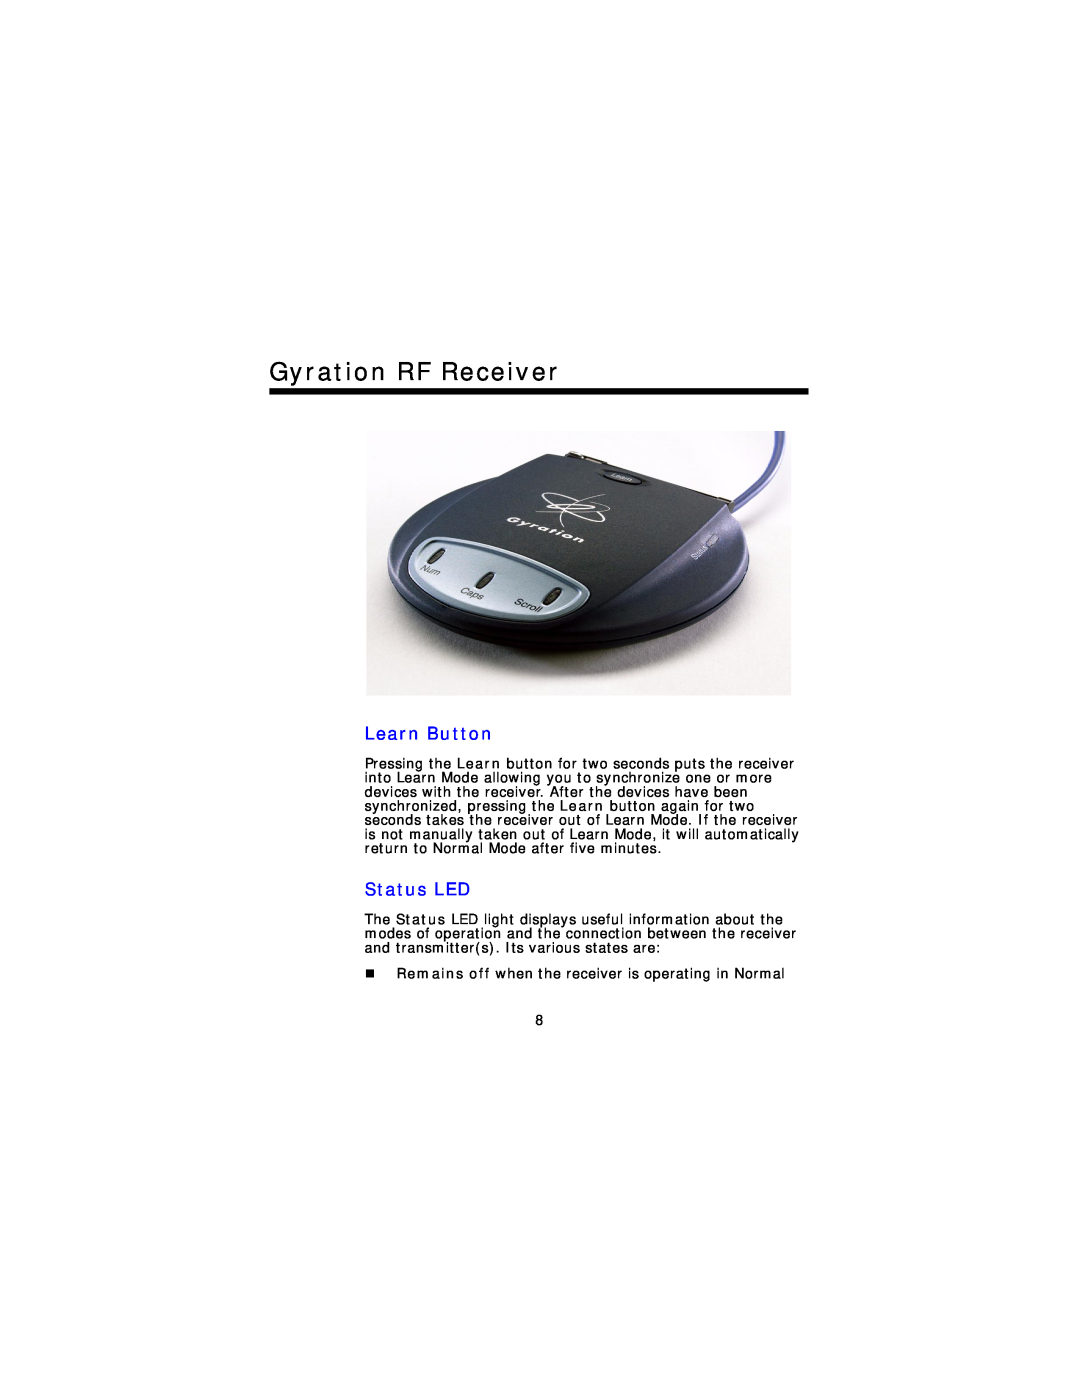 Gyration Compact Keyboard user manual Gyration RF Receiver, Learn Button, Status LED 